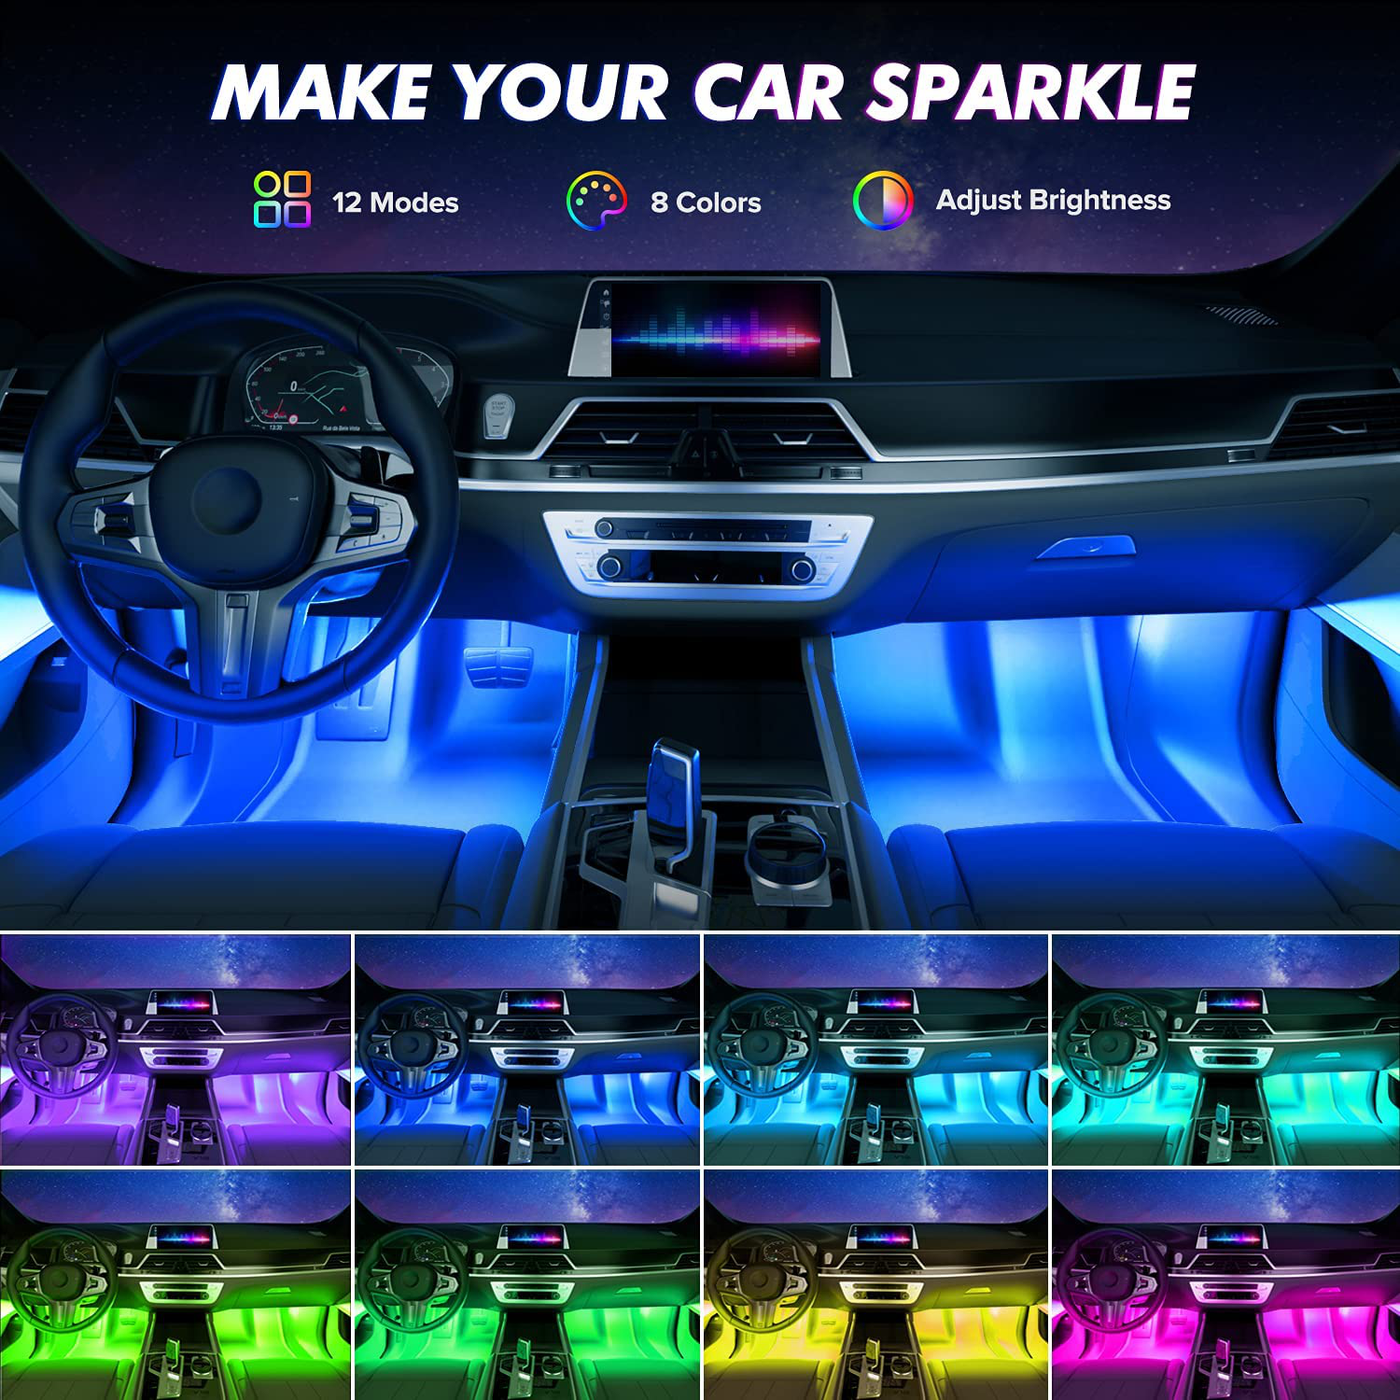 SEALIGHT Interior Car Lights, 72 Car LED Lights, 8 RGB colors, Sound Active Function Under Dash Lighting Kit, USB Light Strips with Control Box and Car Charger